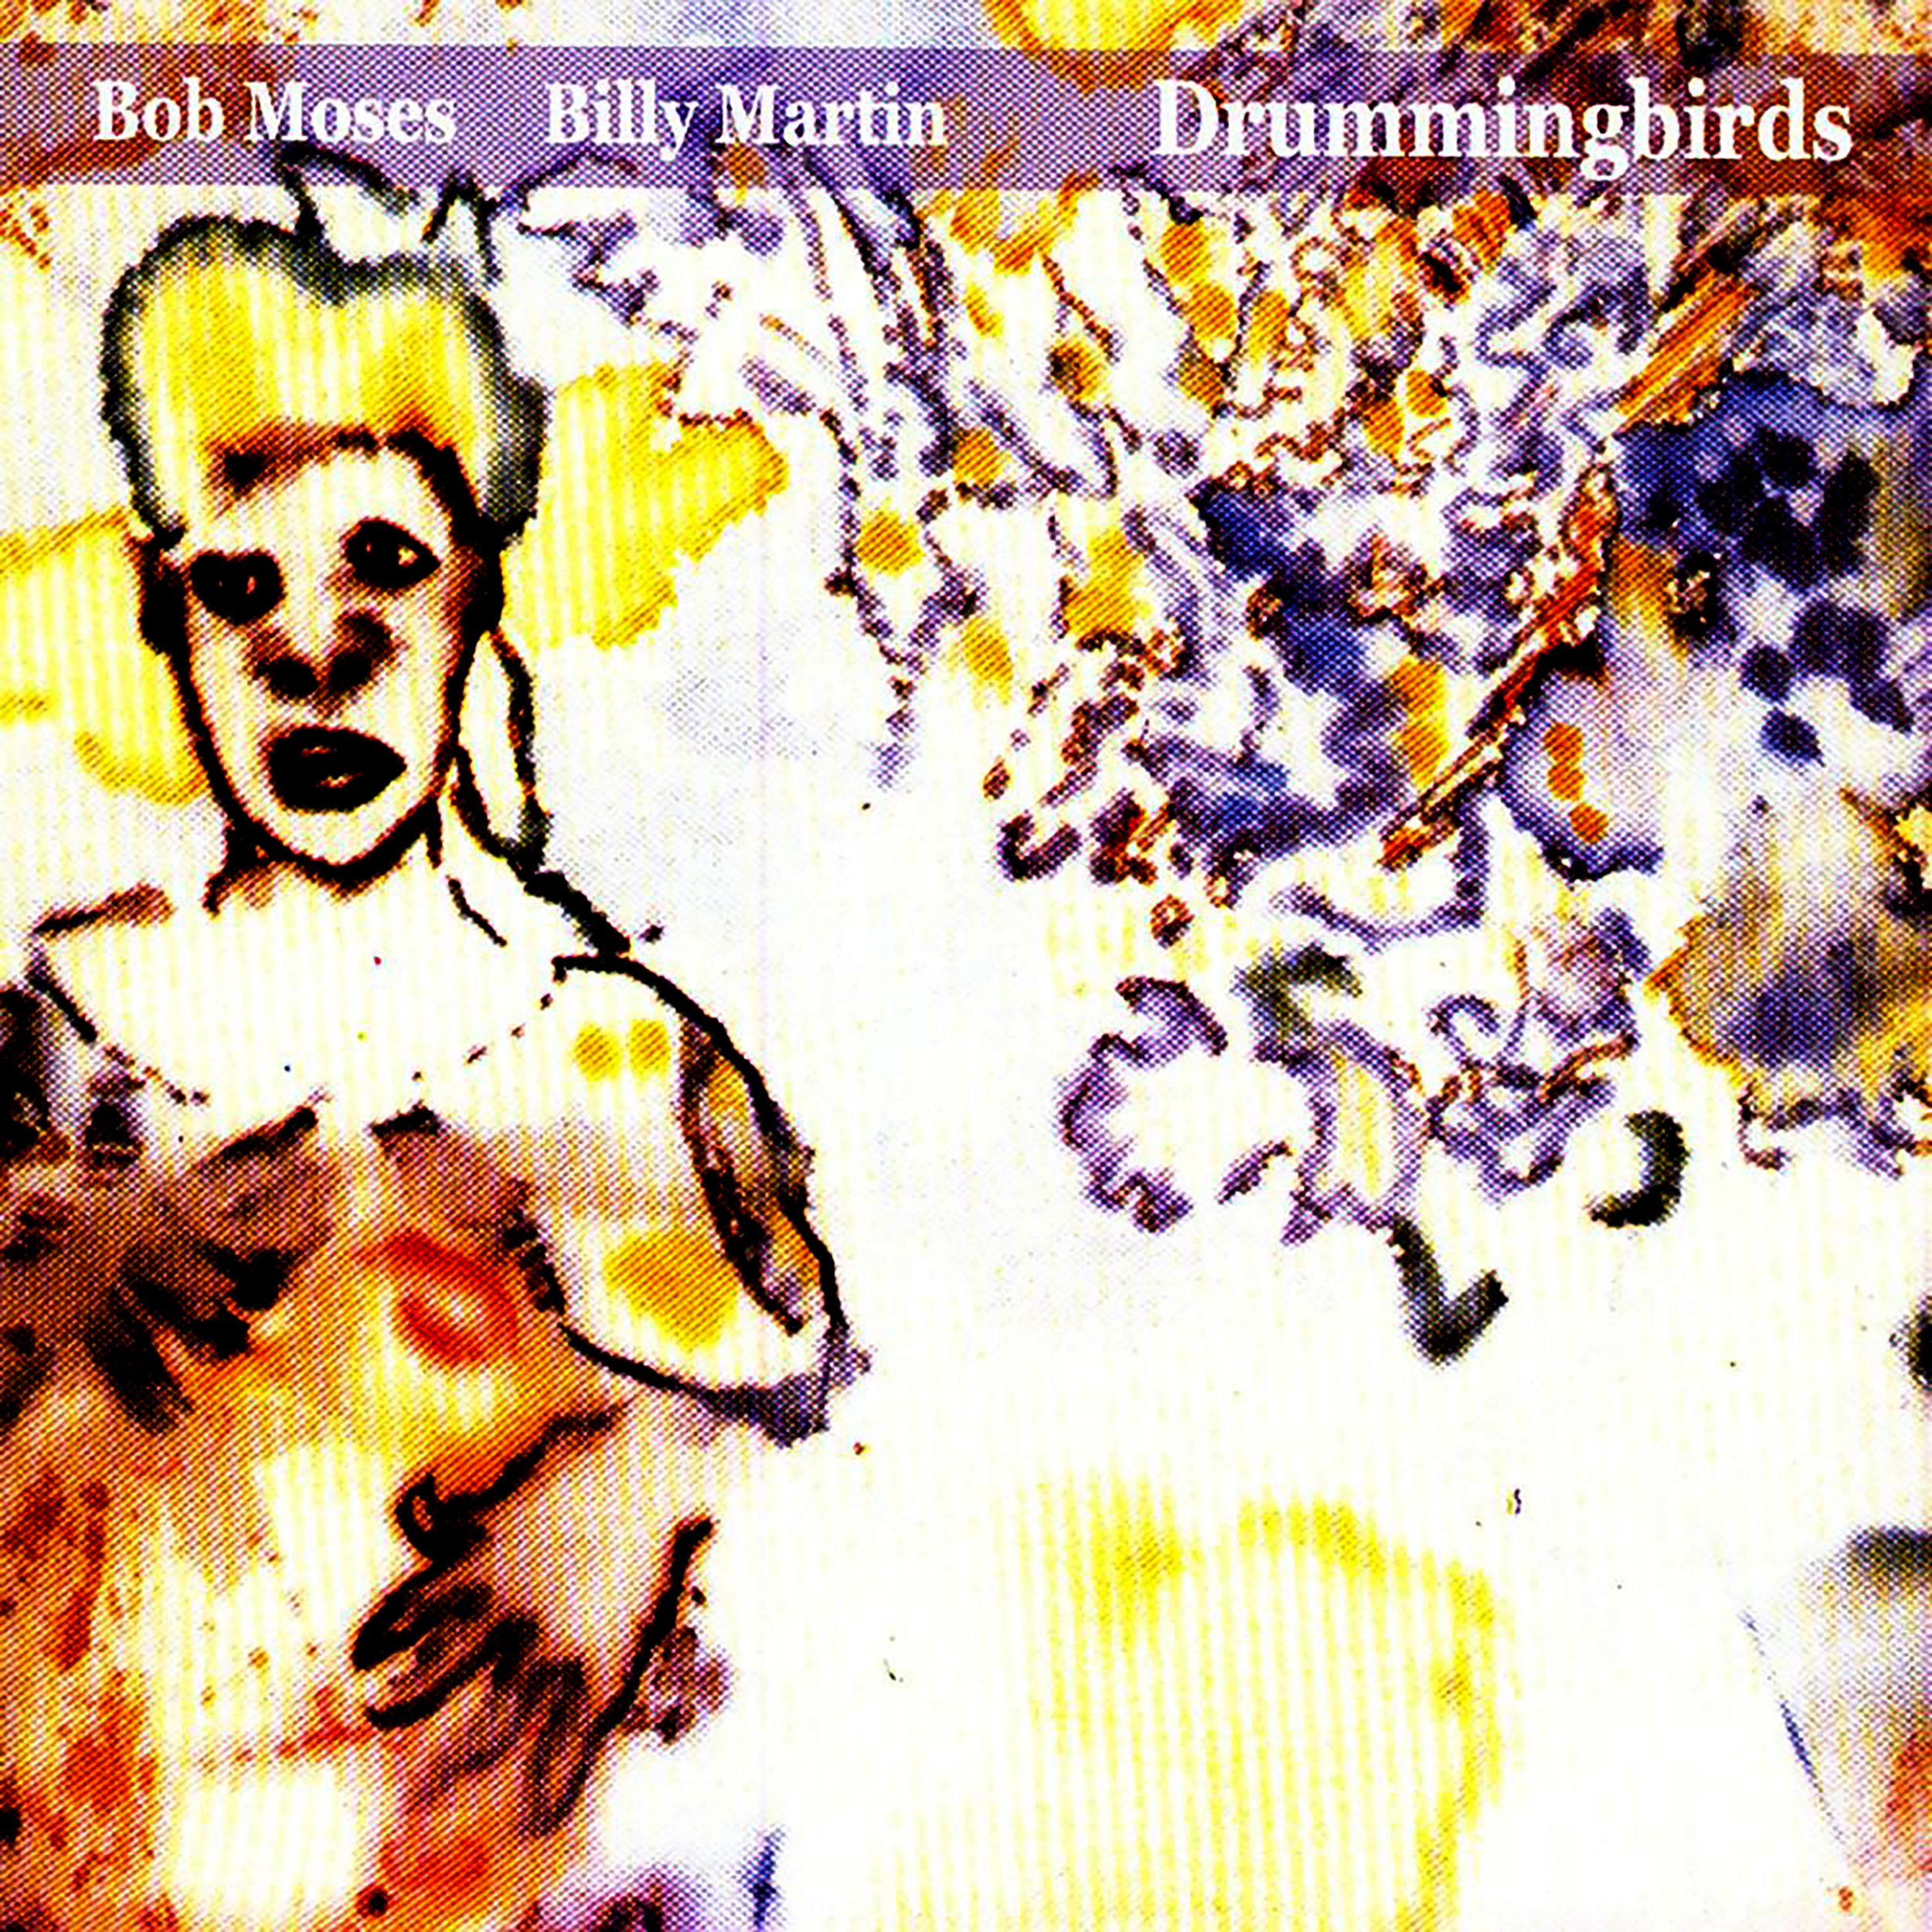   DRUMMINGBIRDS    Compact Disc -    E-mail your order     Release date - 2003    Label -    Amulet     Ra Kalam Bob Moses - Drums, percussion    Billy Martin - Drums, percussion  